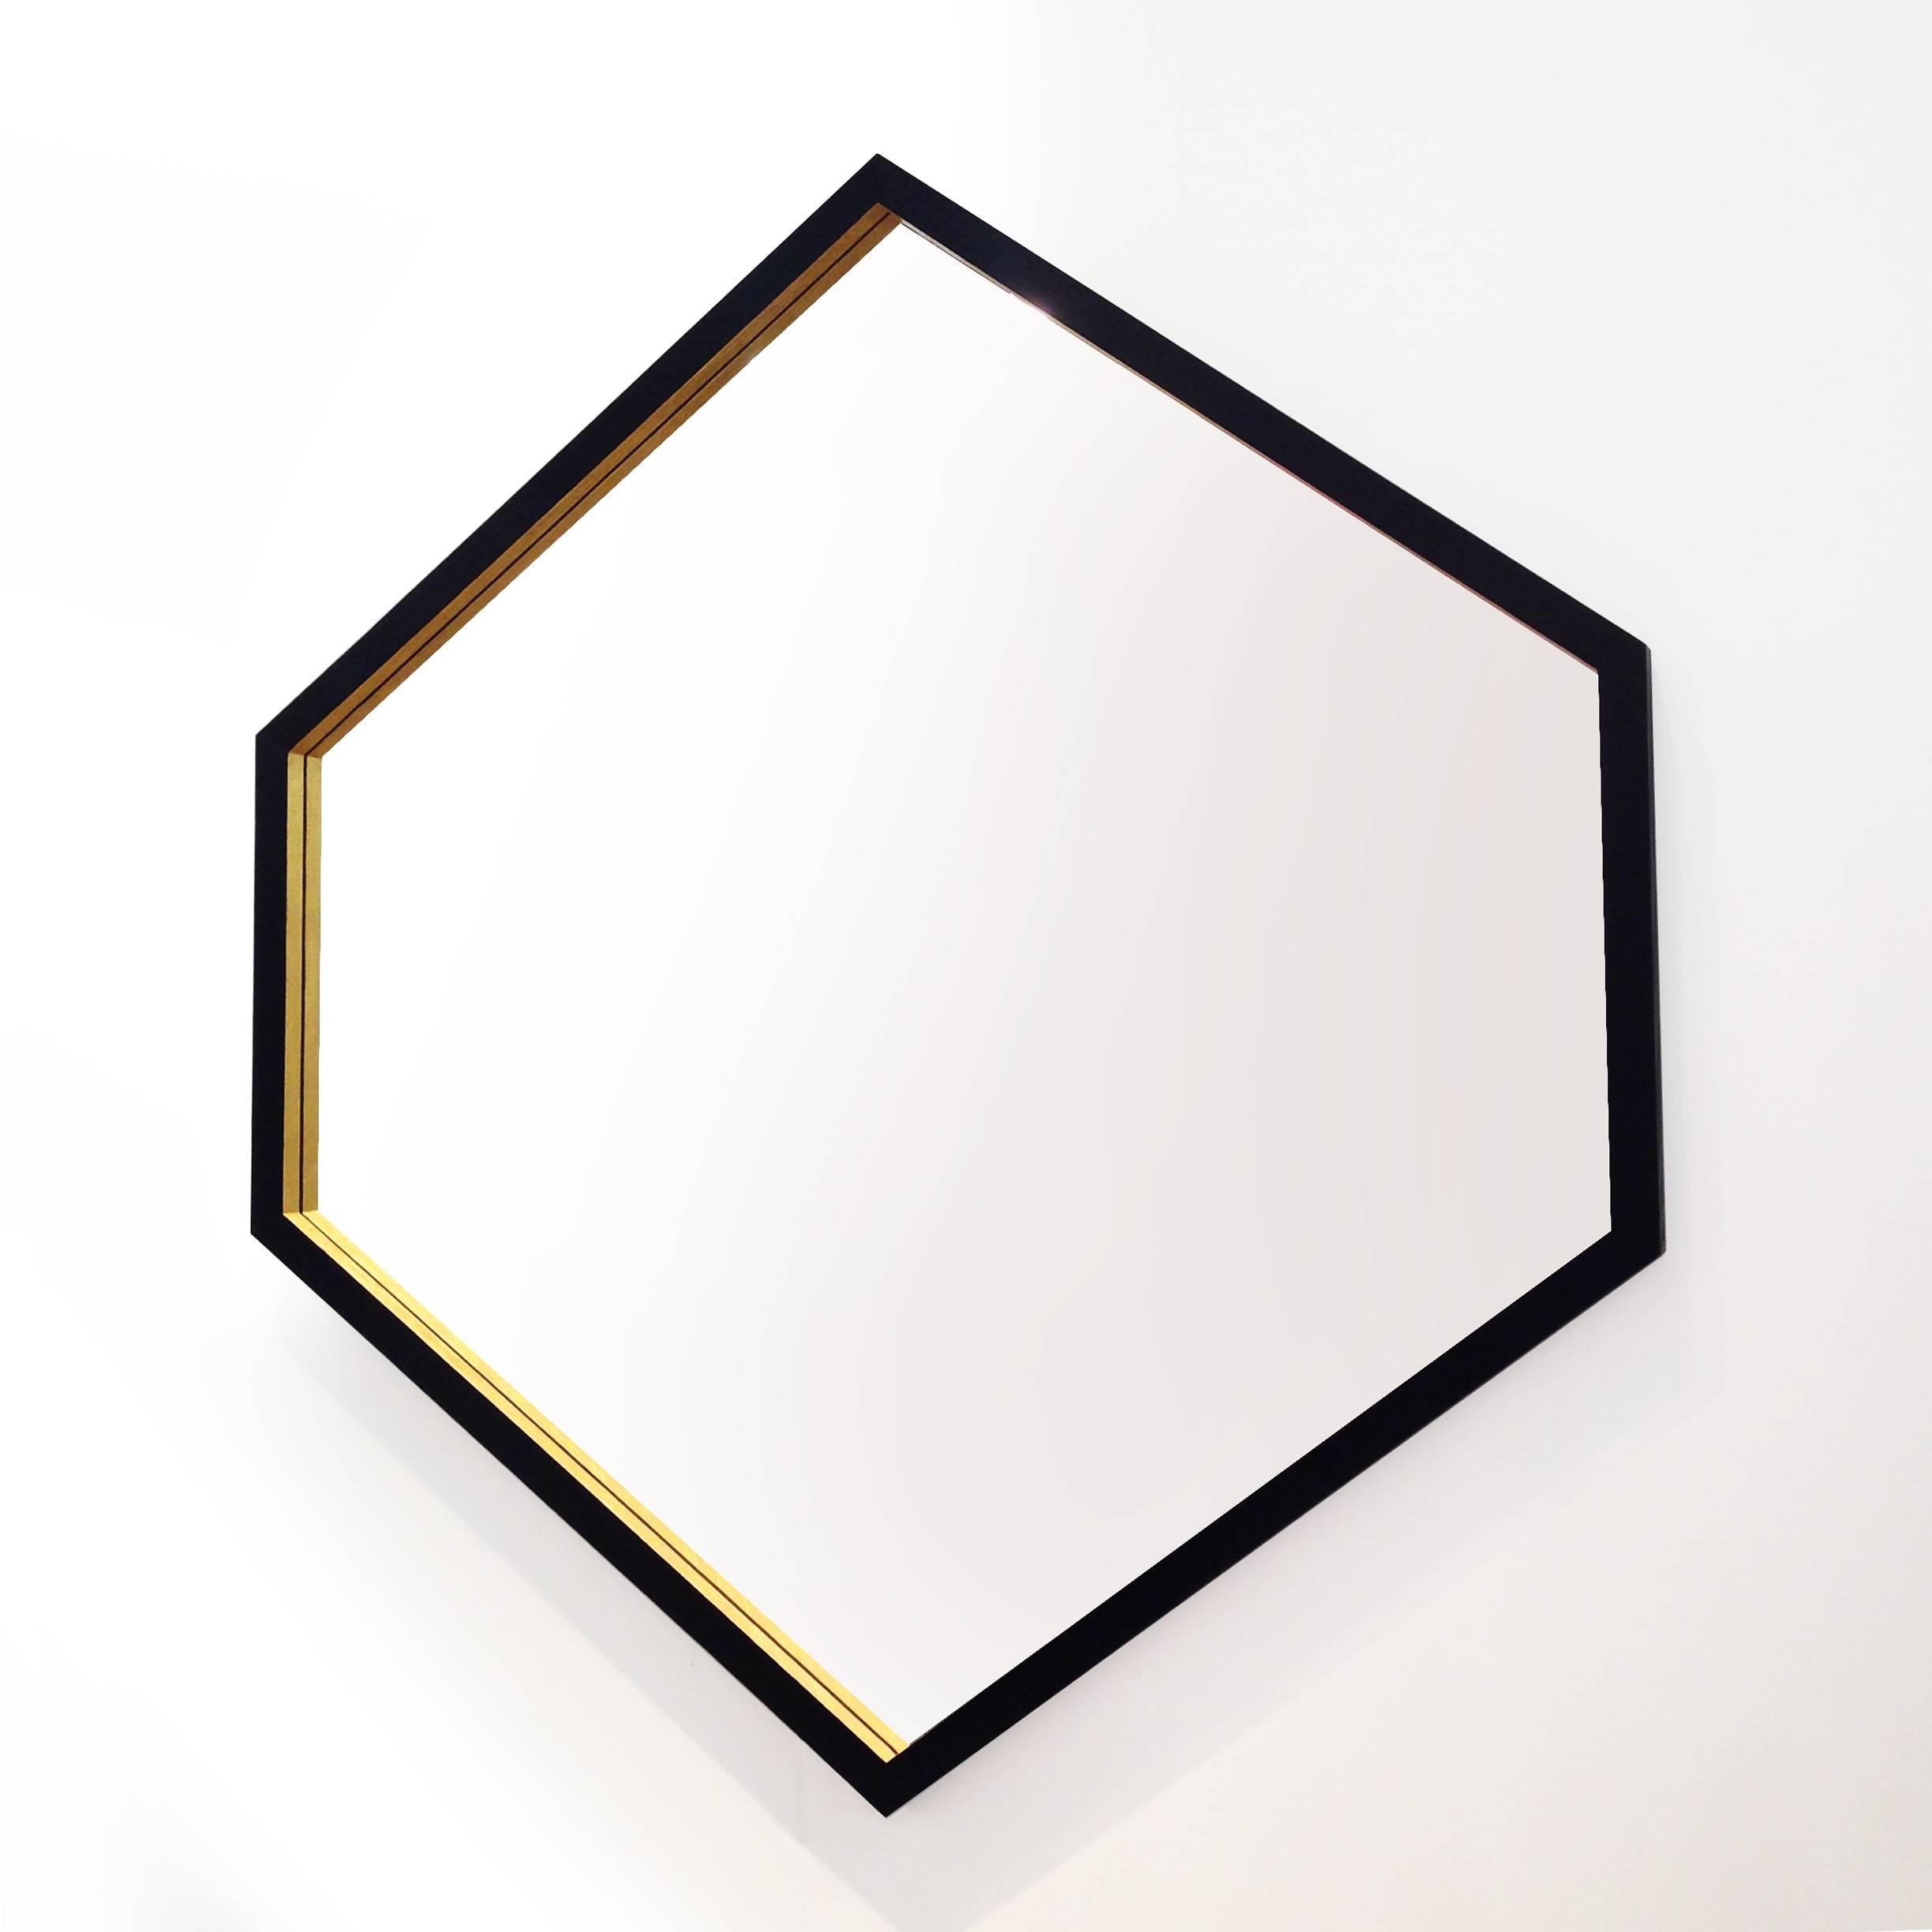 The “Hex Mirror